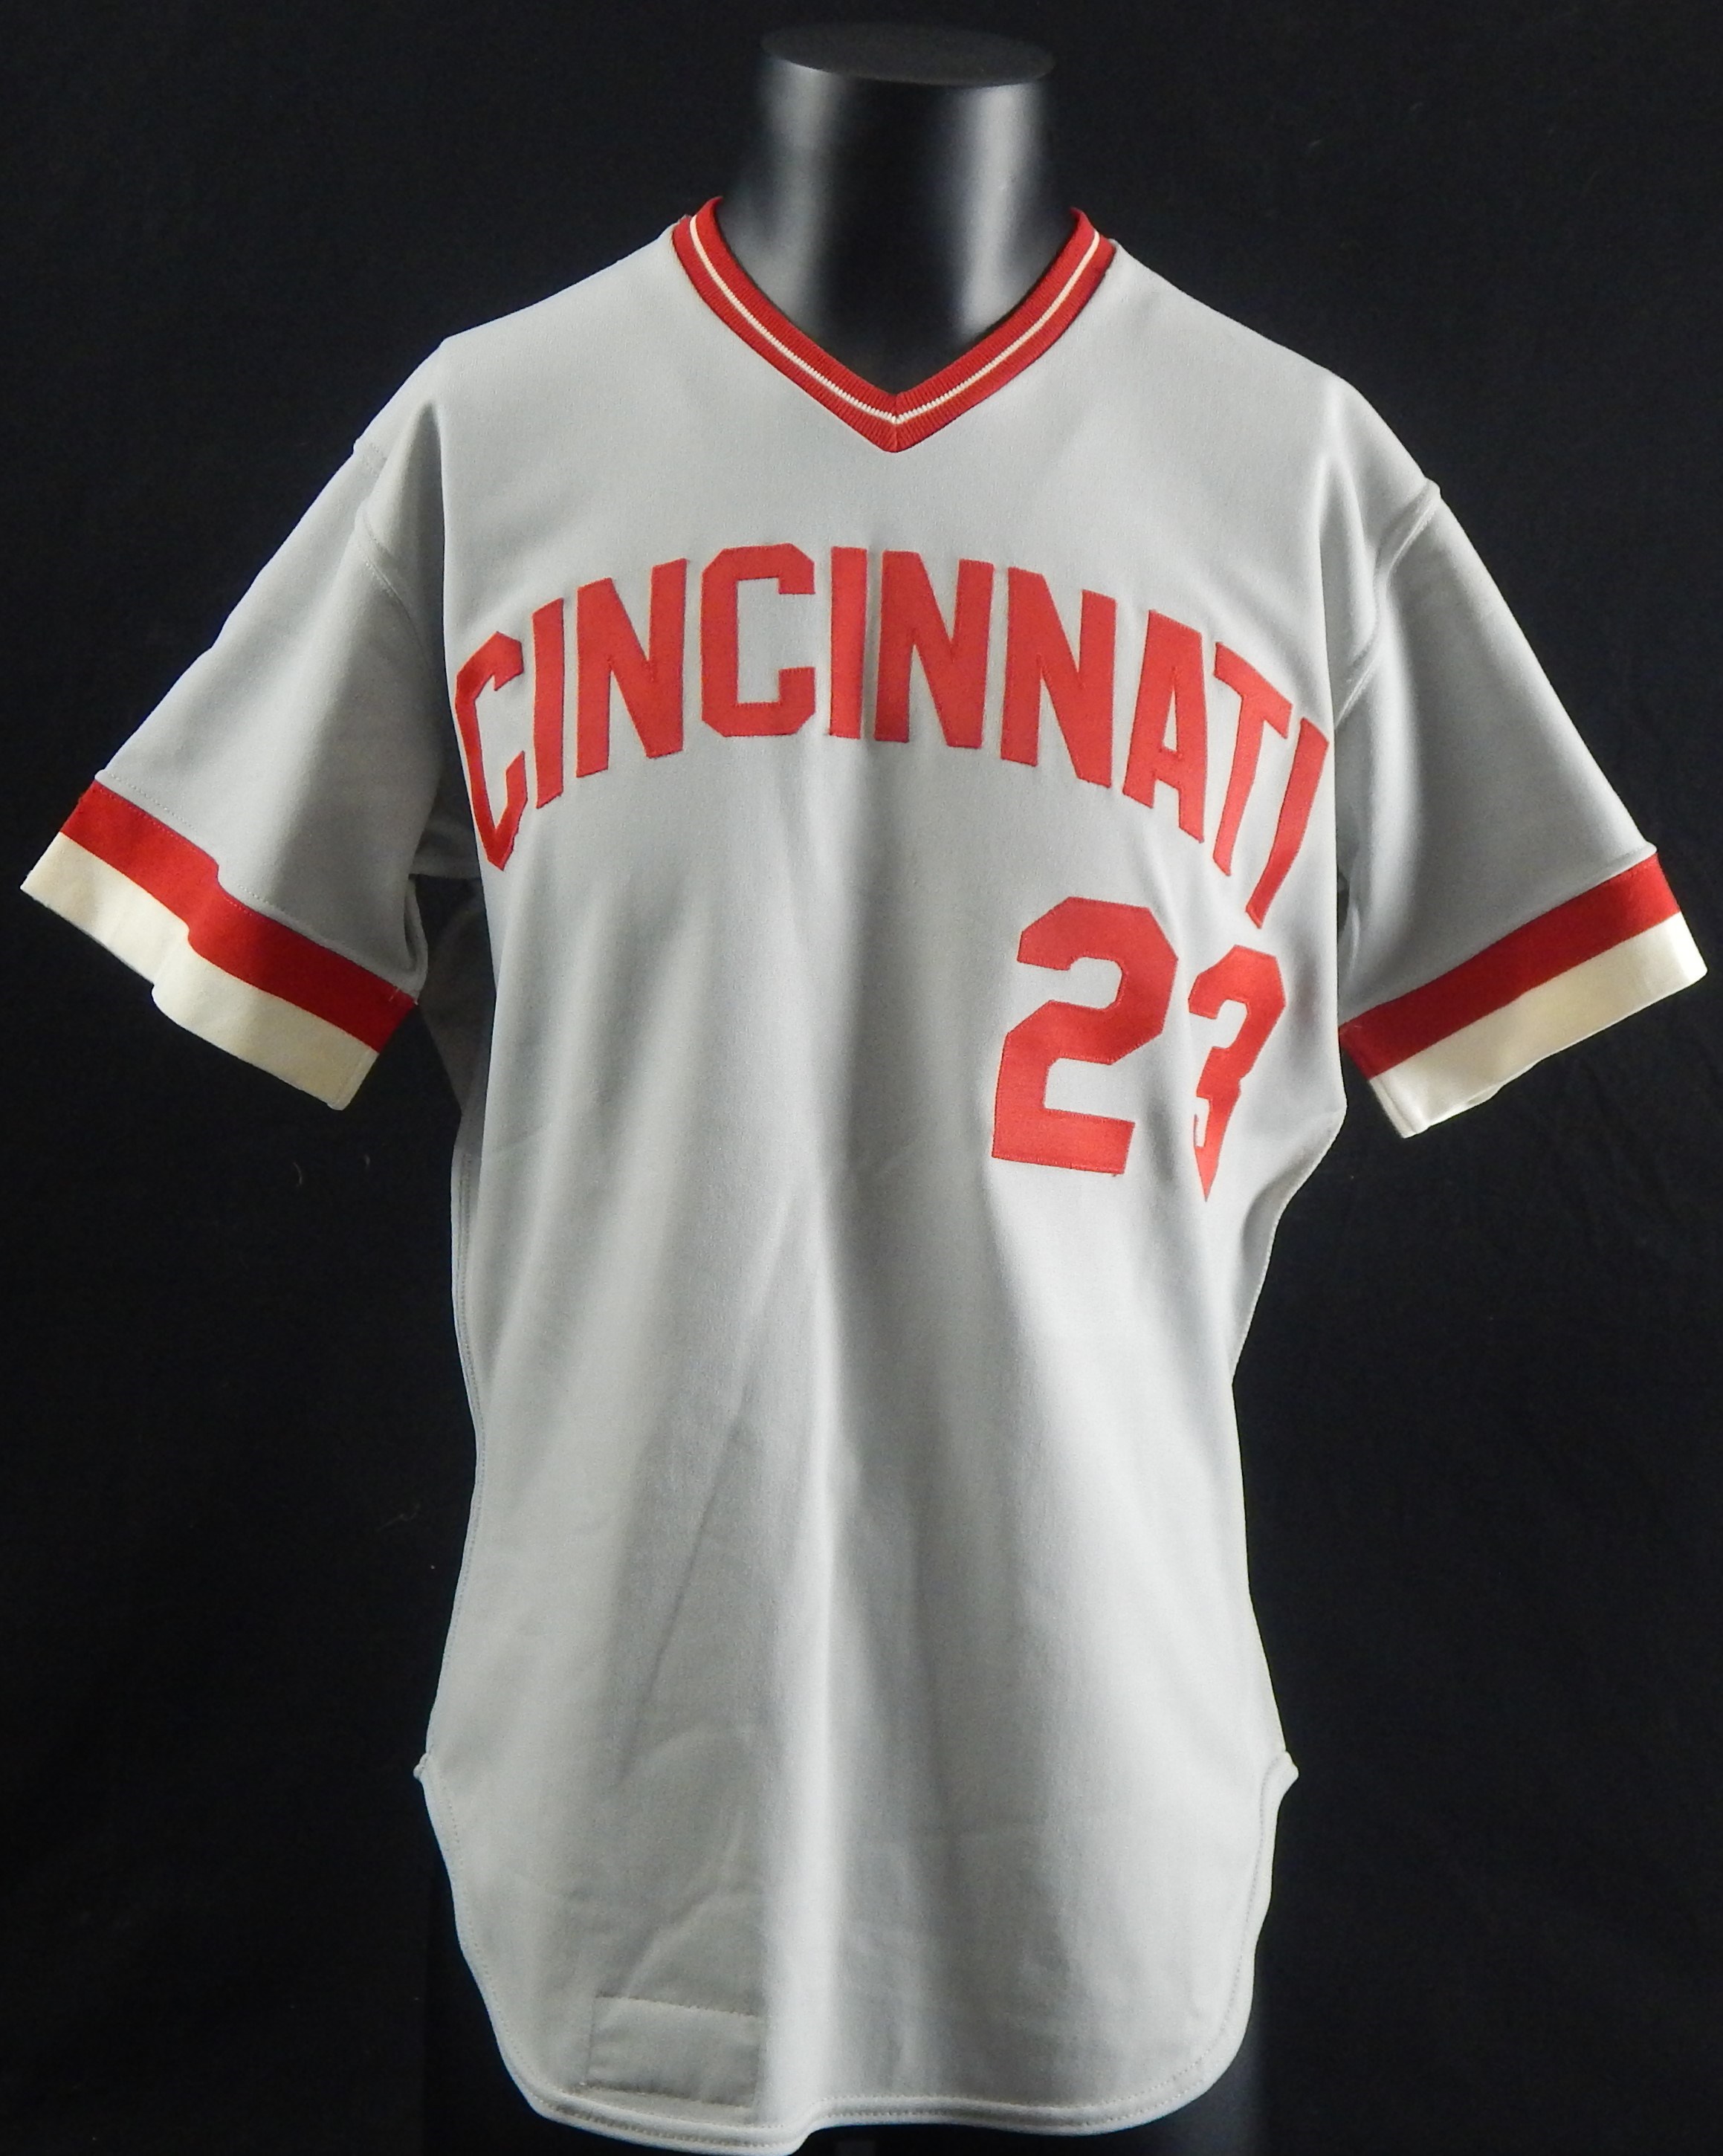 - 1978 Tour of Japan Cincinnati Reds Jersey From the Bernie Stowe Collection